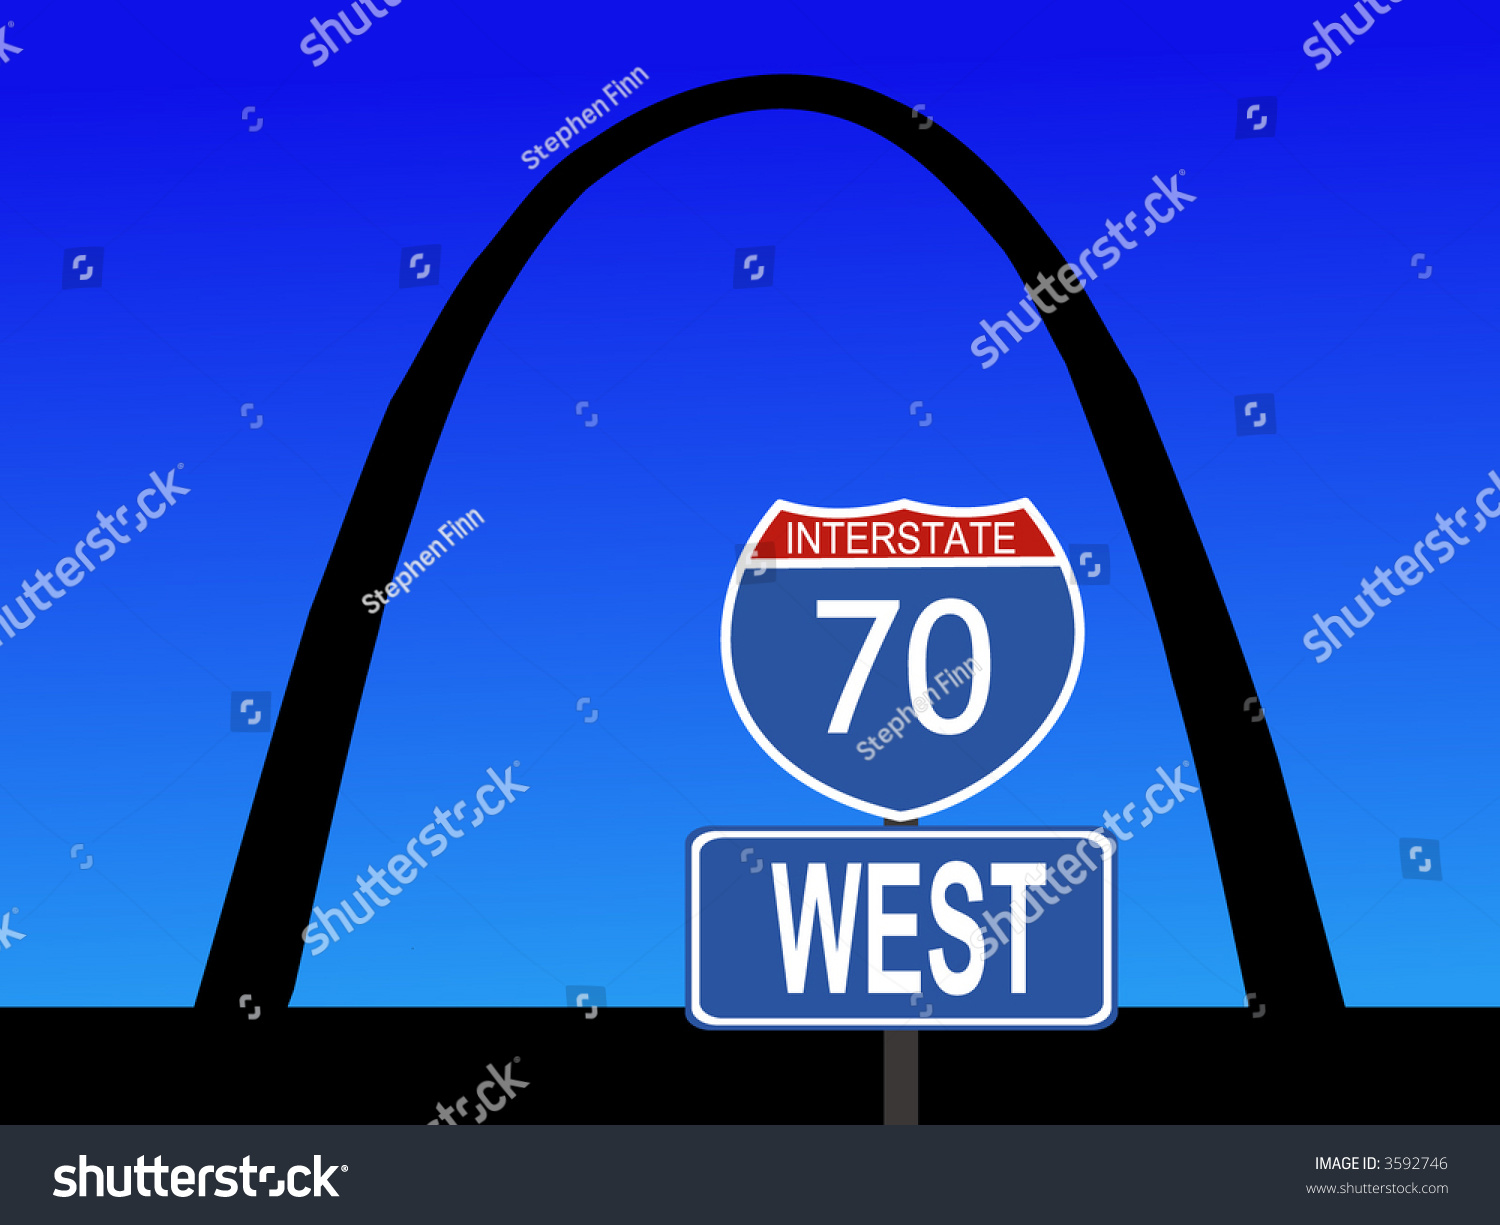 Gateway Arch St Louis Missouri With Close View Of Interstate 70 Sign Stock Vector Illustration ...